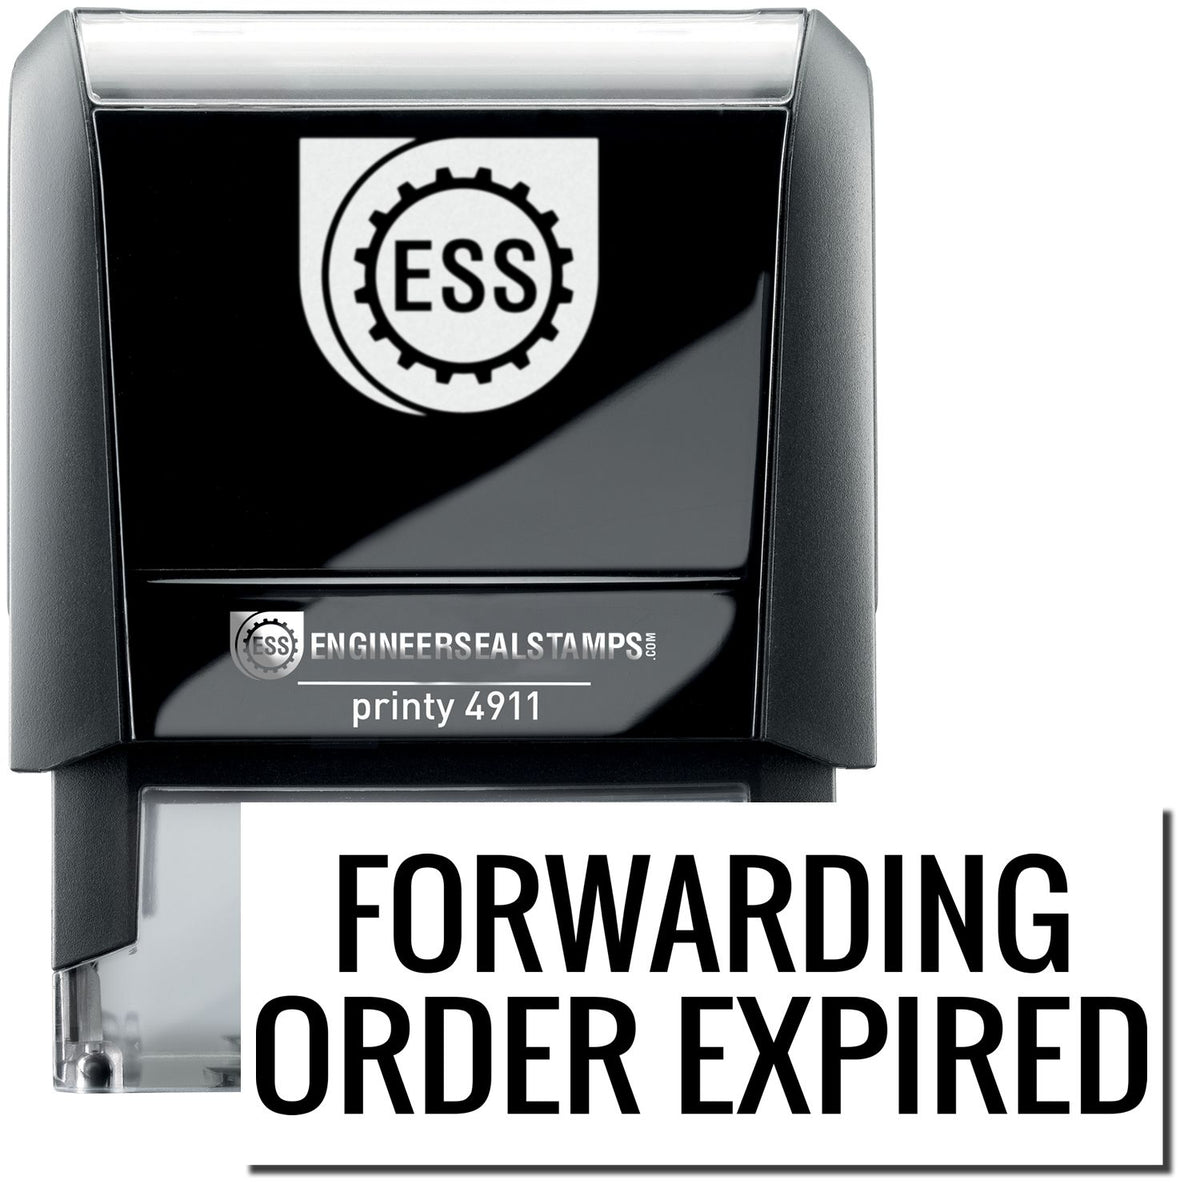 A self-inking stamp with a stamped image showing how the text &quot;FORWARDING ORDER EXPIRED&quot; is displayed after stamping.